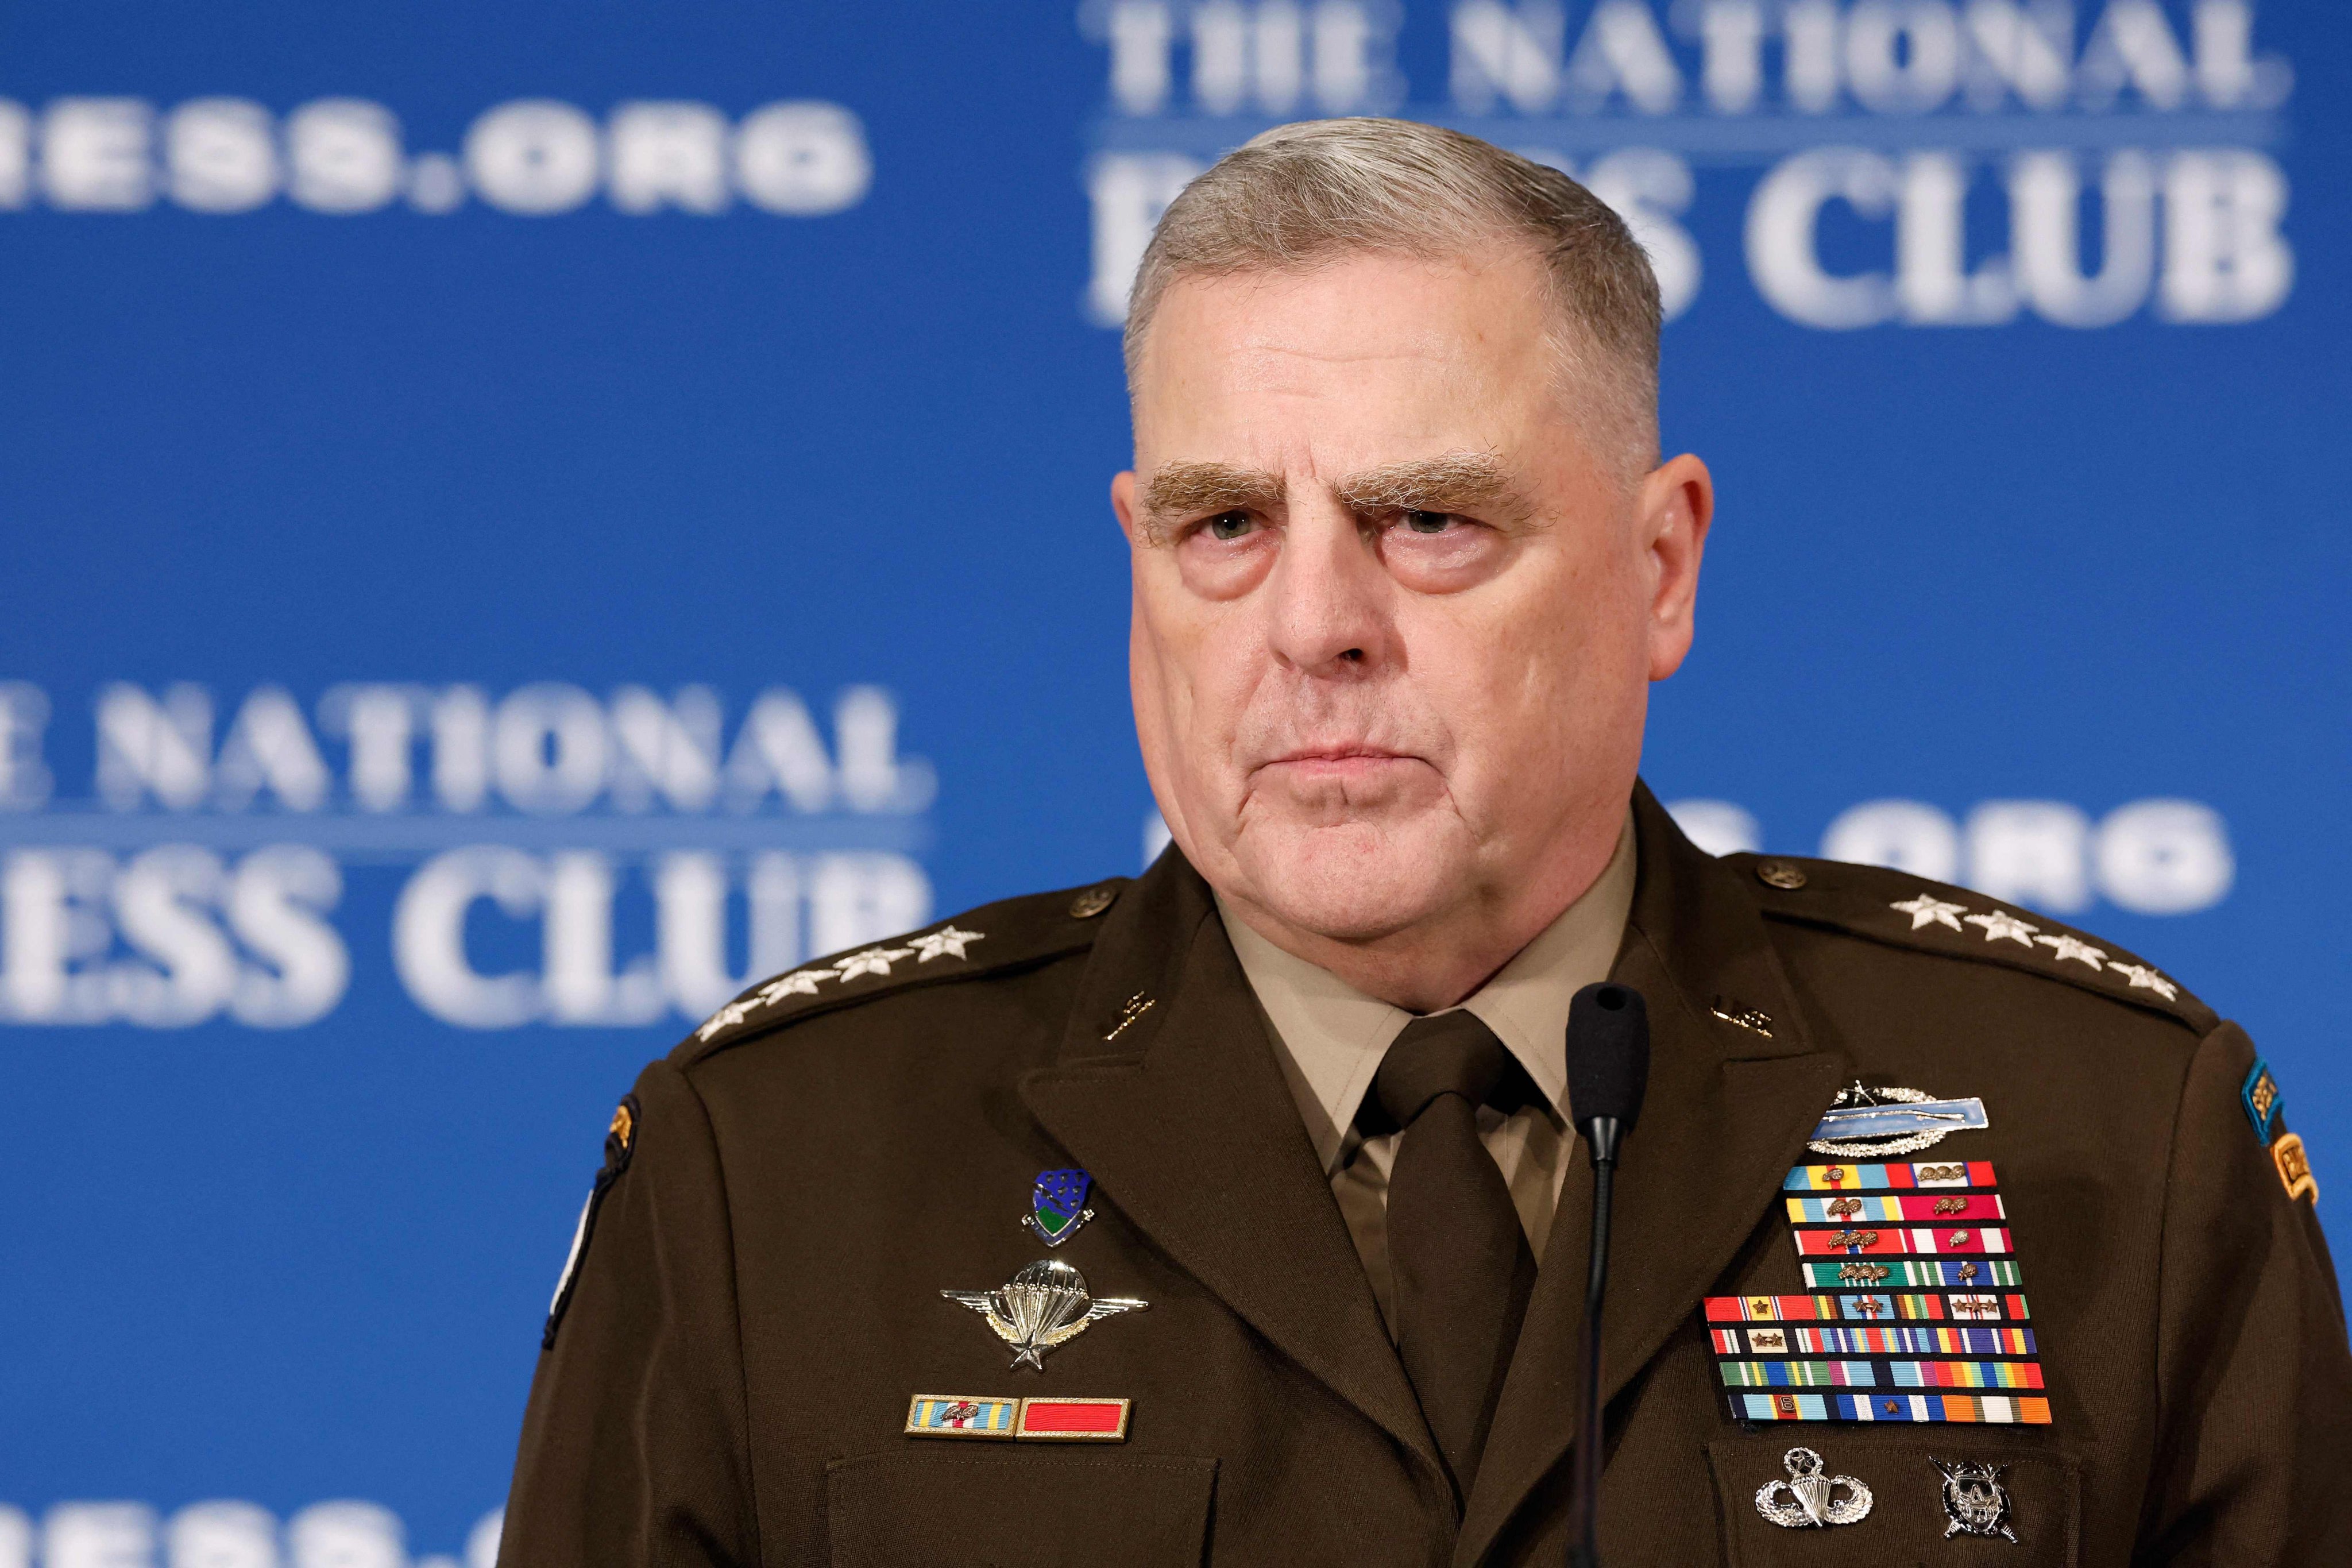 US Joint Chiefs of Staff Chairman General Mark Milley speaks at the National Press Club in Washington on Friday. Photo: Getty Images via AFP